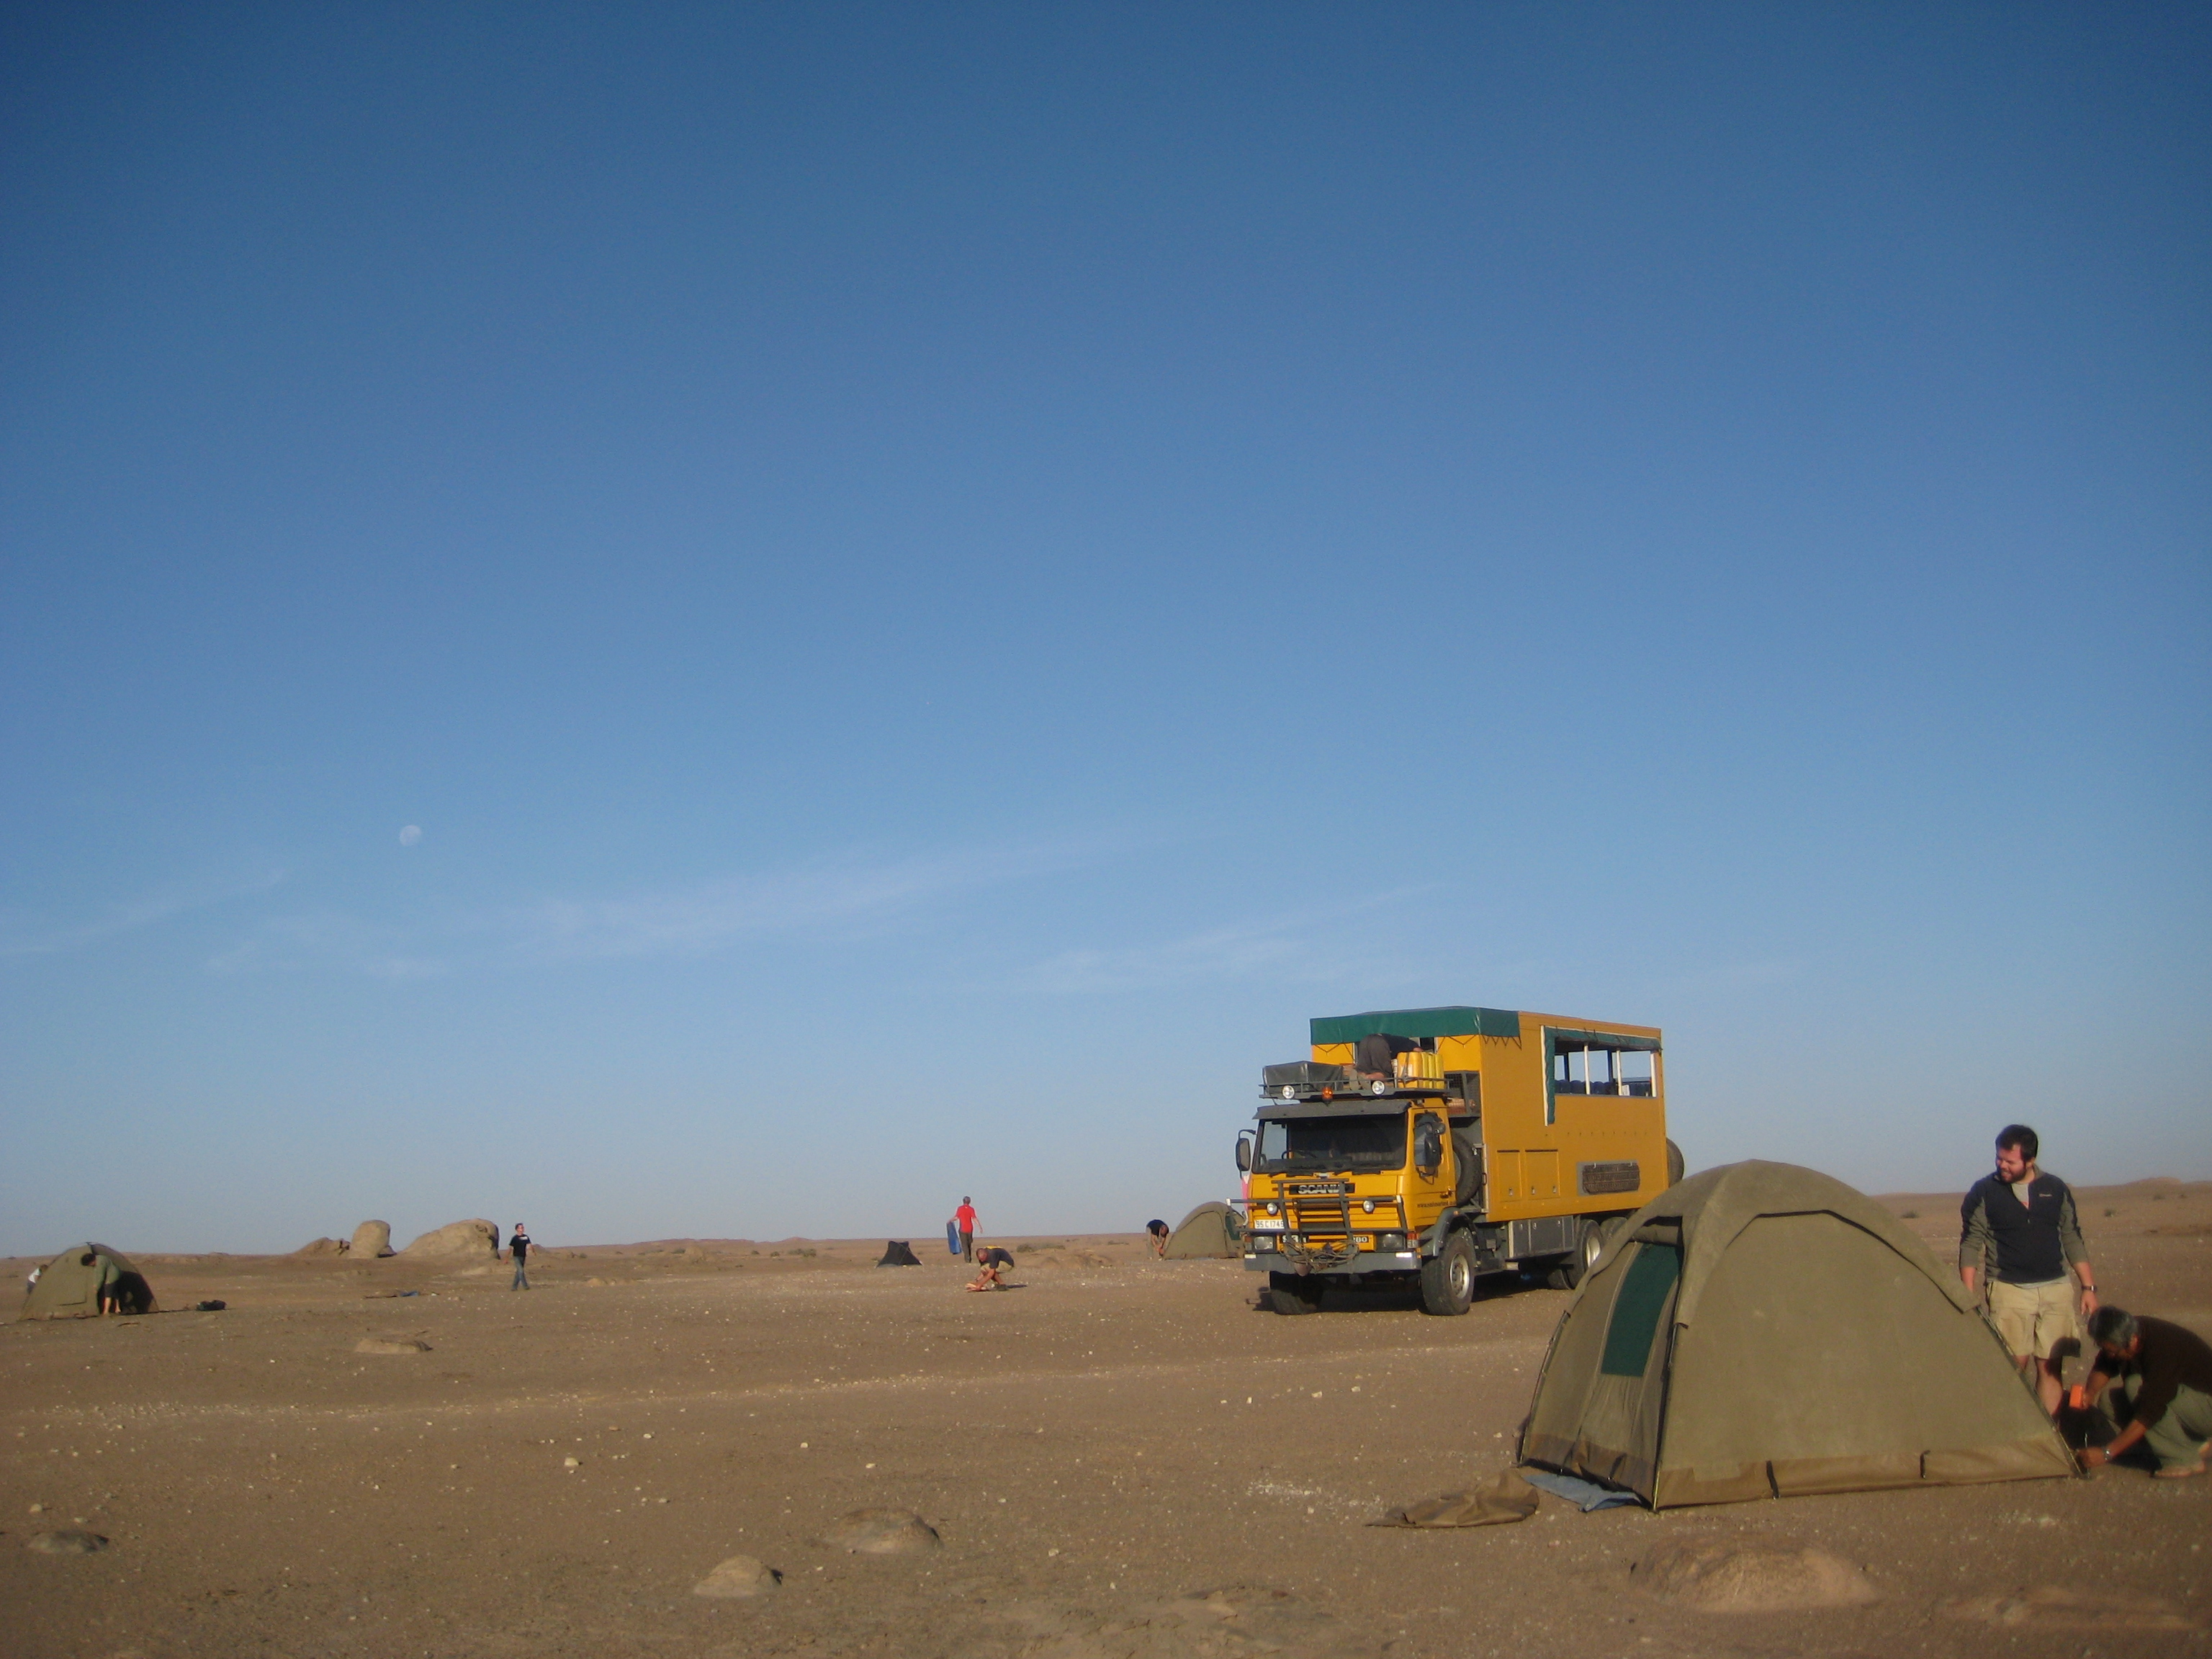 Overland camping